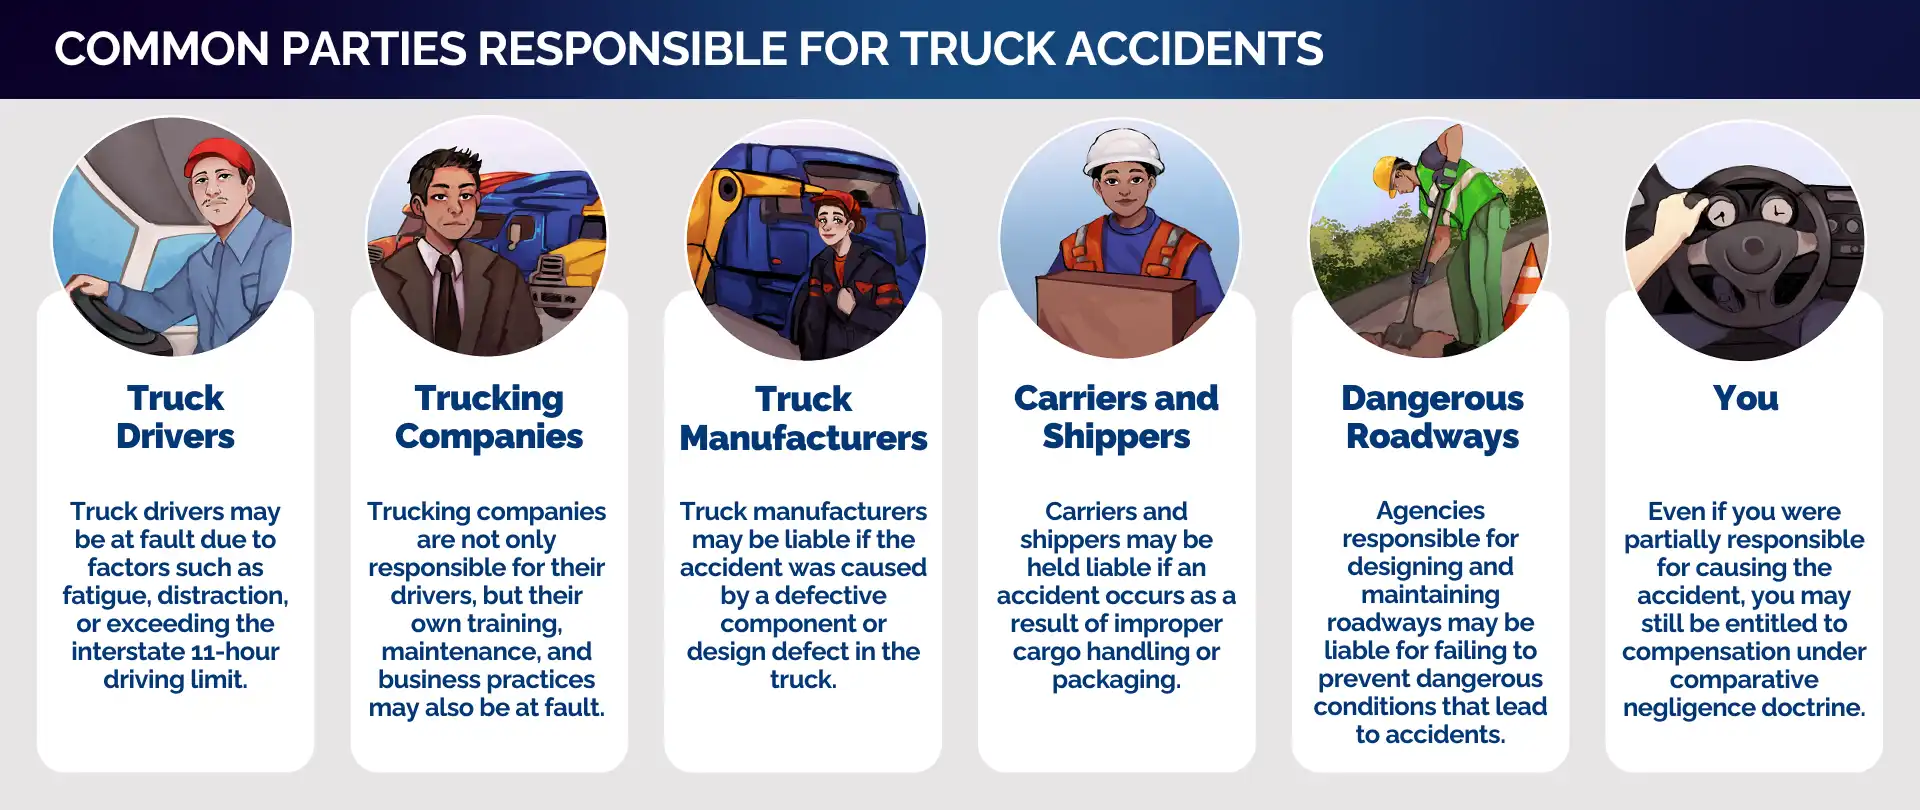 Illustrated infographic showing the common parties responsible for causing truck accidents. They are truck drivers, trucking companies, truck manufacturers, carriers & shippers, dangerous roadways, and you